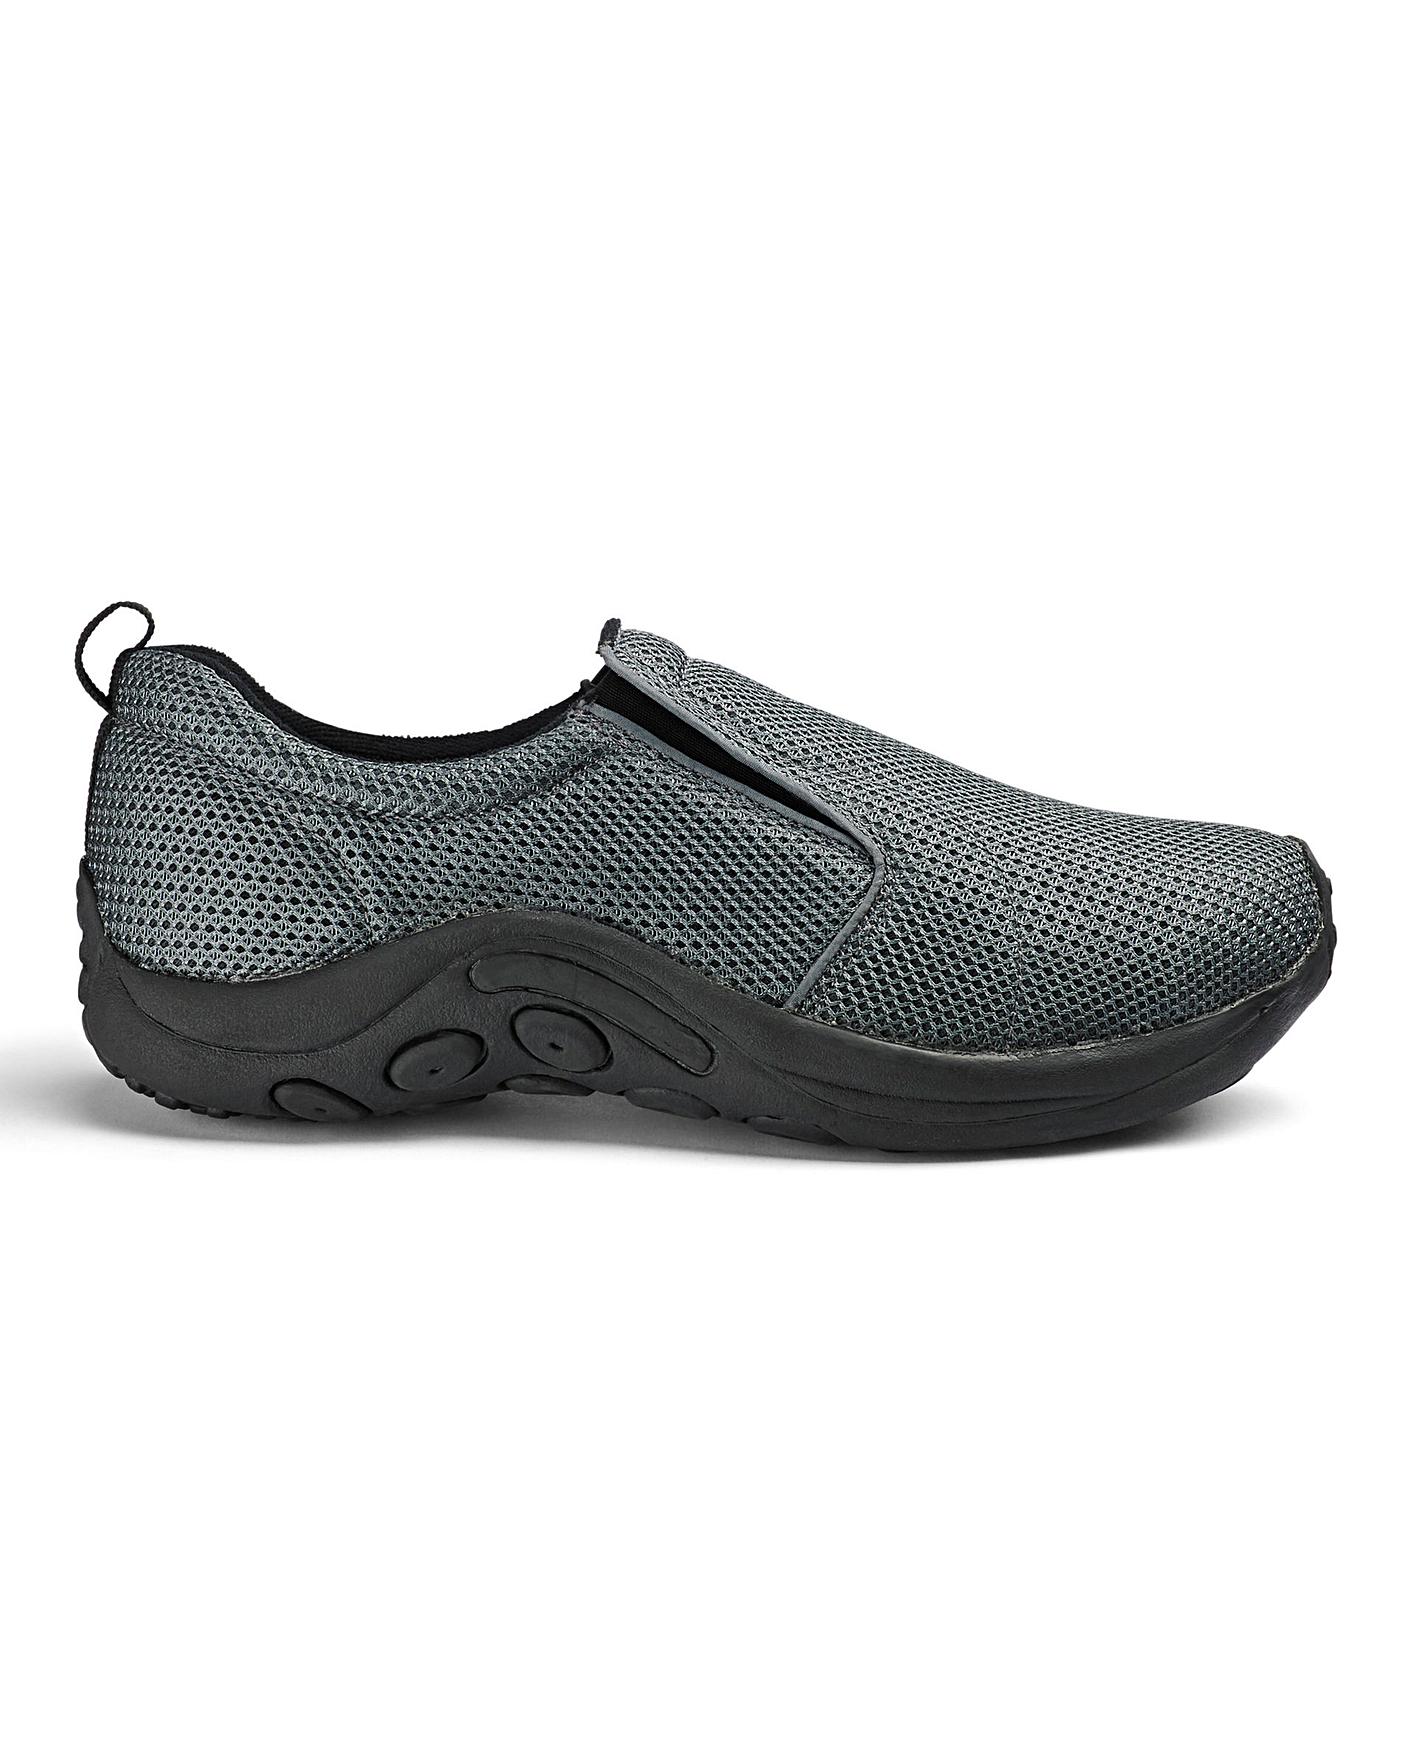 Mesh Slip On Shoes Extra Wide Fit | J D Williams